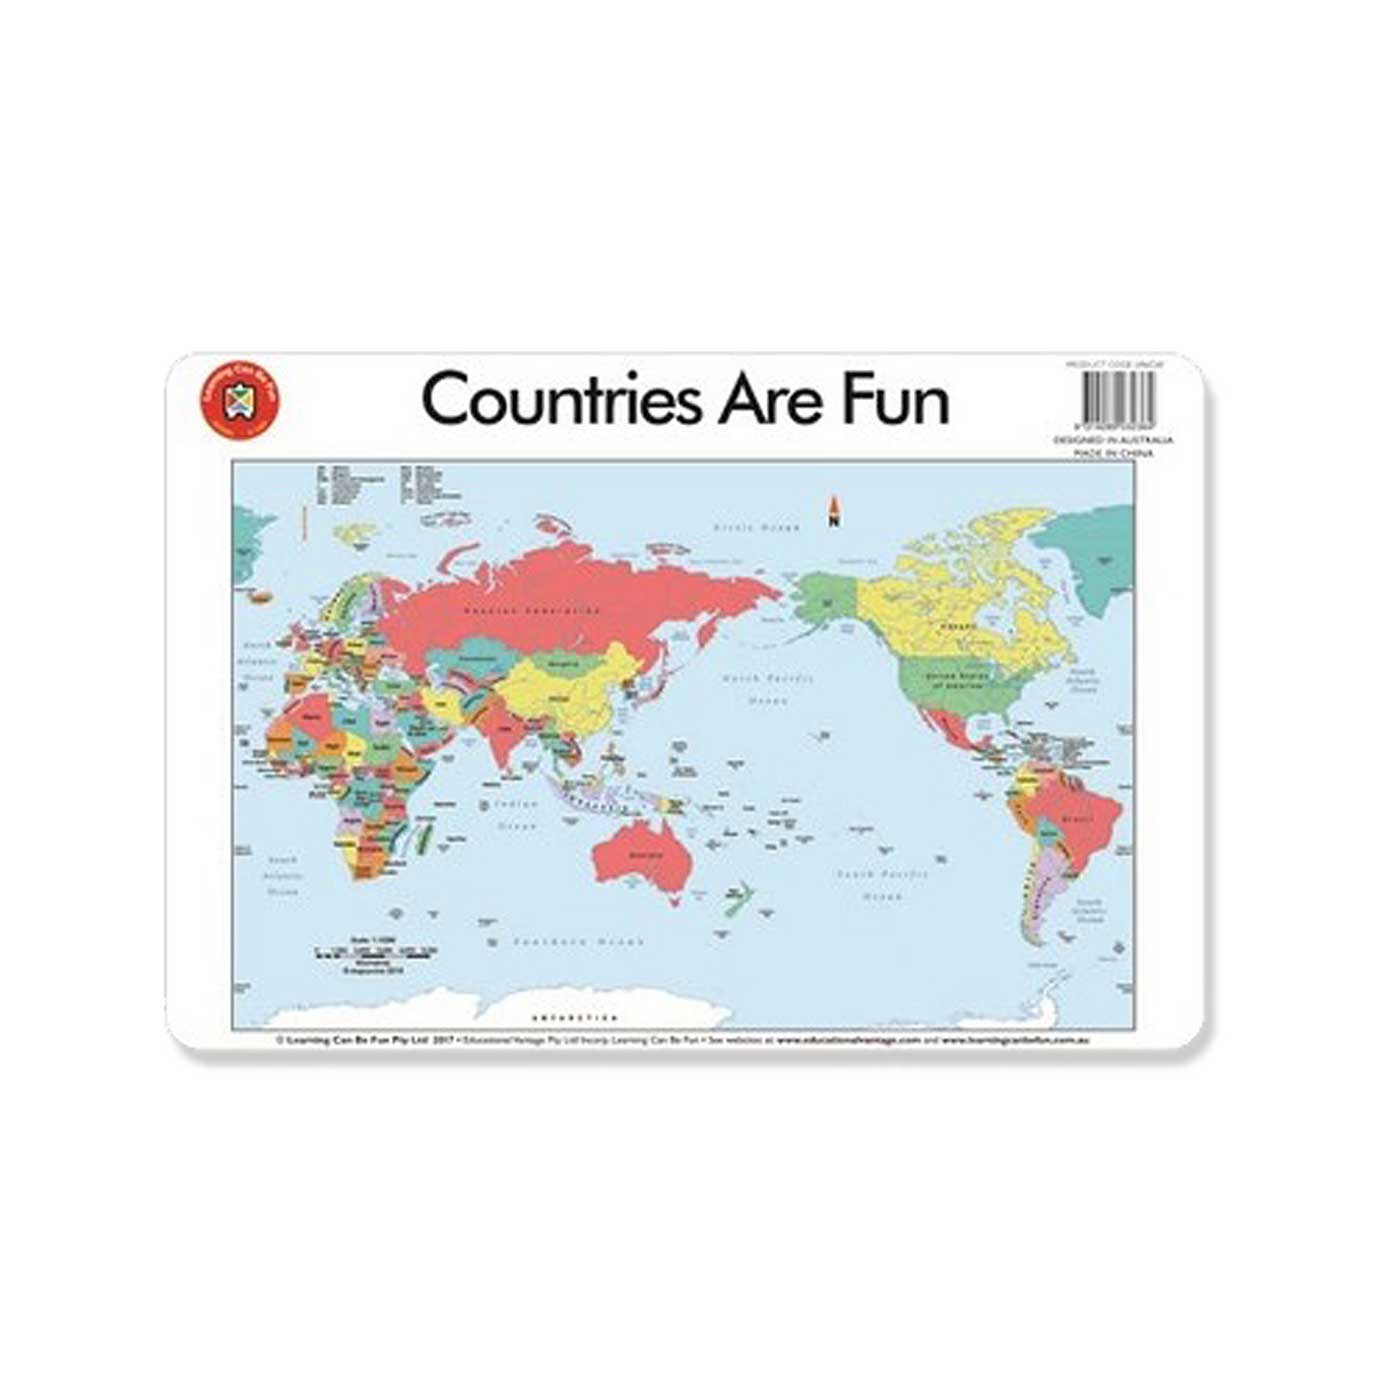 LCBF Placemat Educational Desk Mat 44 x 29 cm Countries are Fun